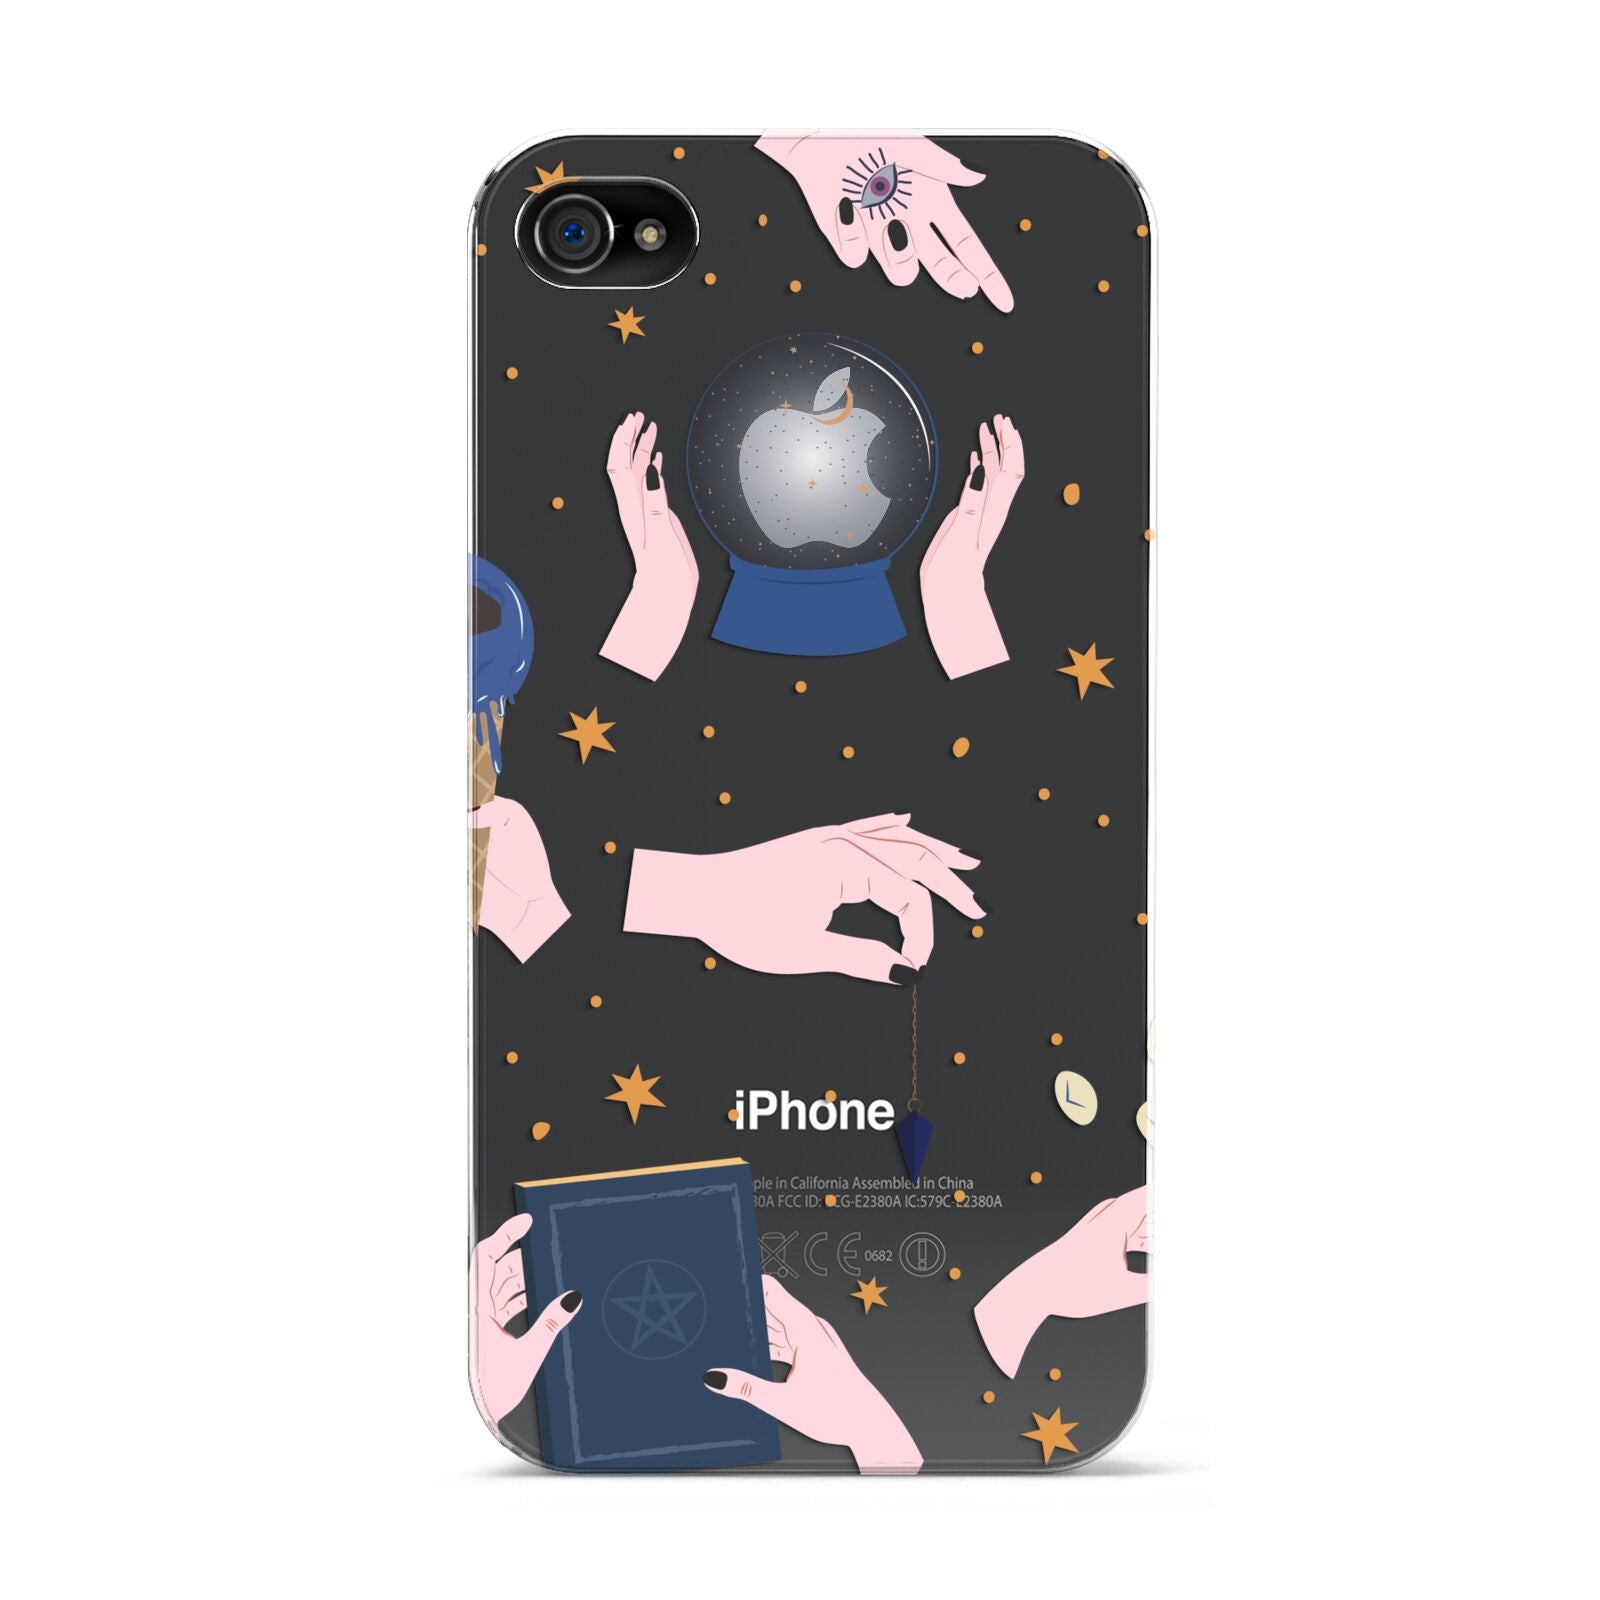 Clairvoyant Witches Hands Apple iPhone 4s Case